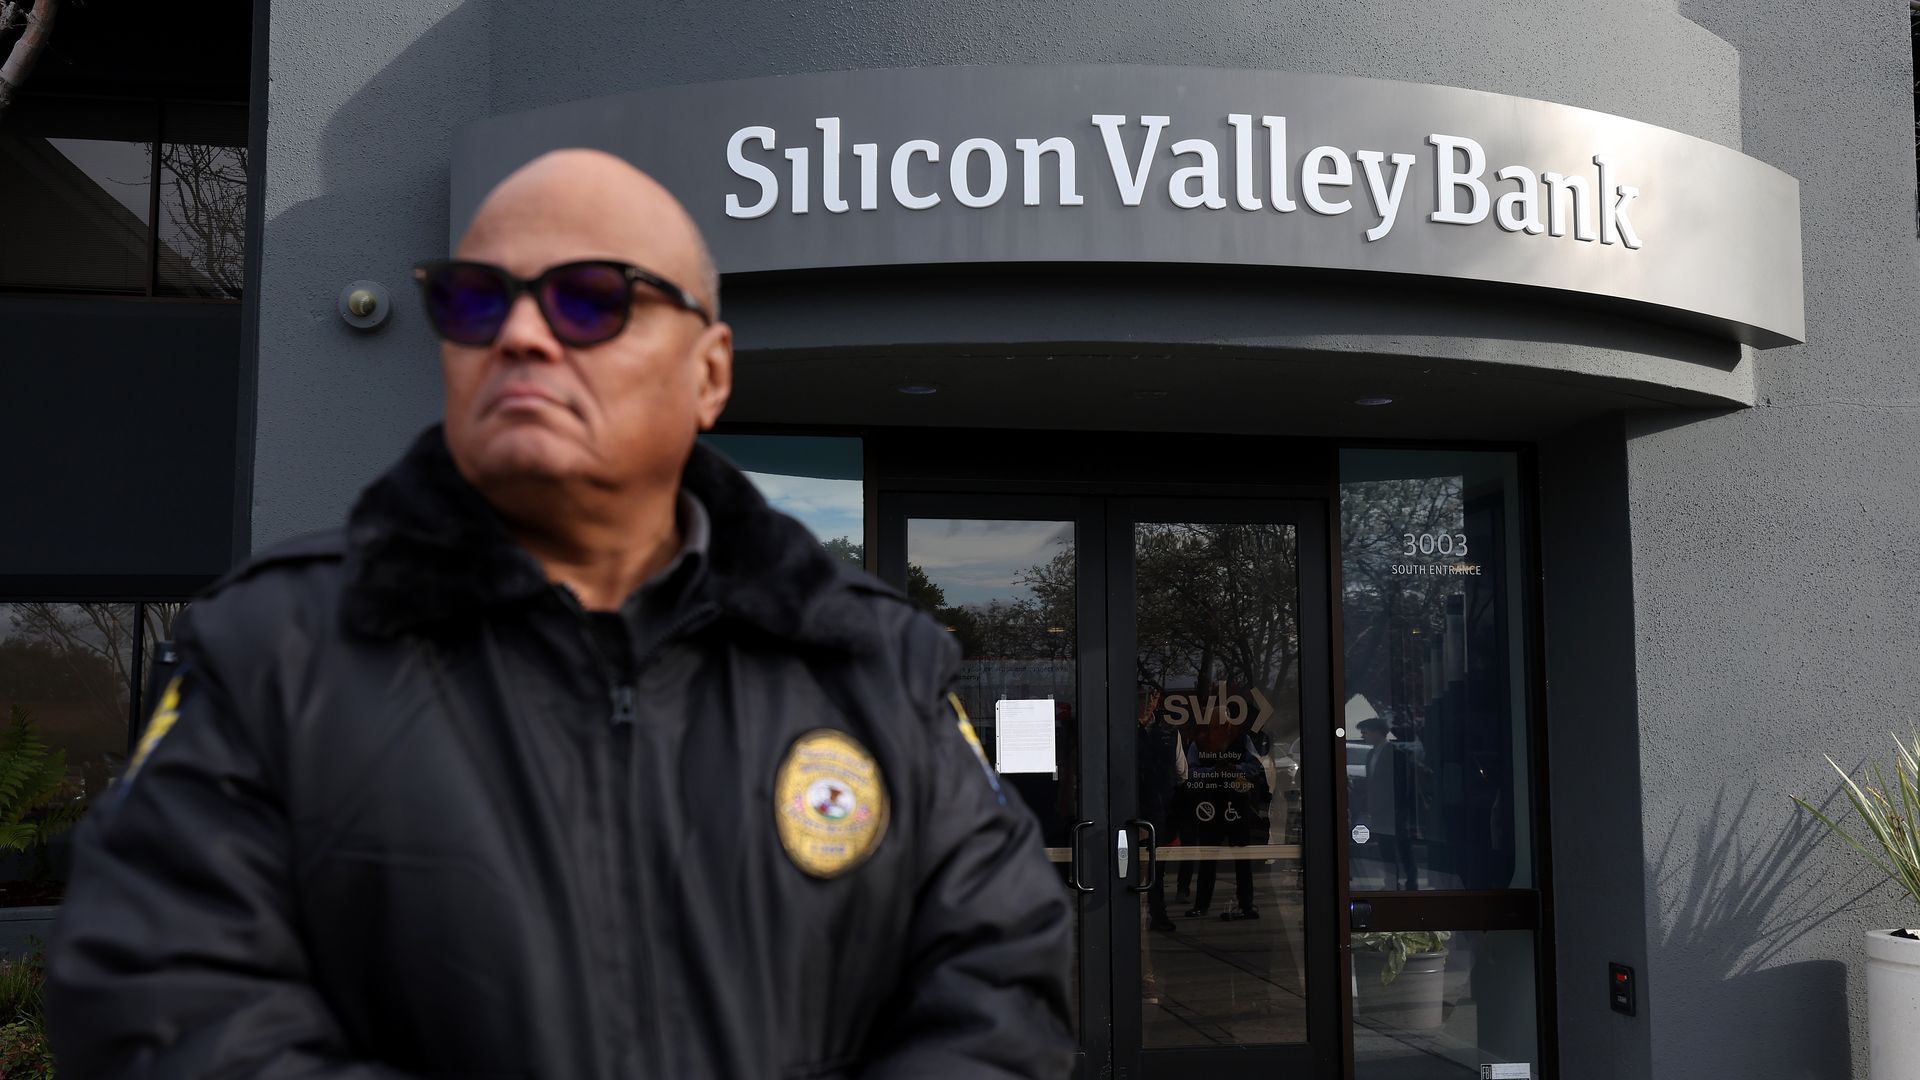 A security guard with sunglasses is standing guard outside Silicon Valley Bank in Santa Clara, California.